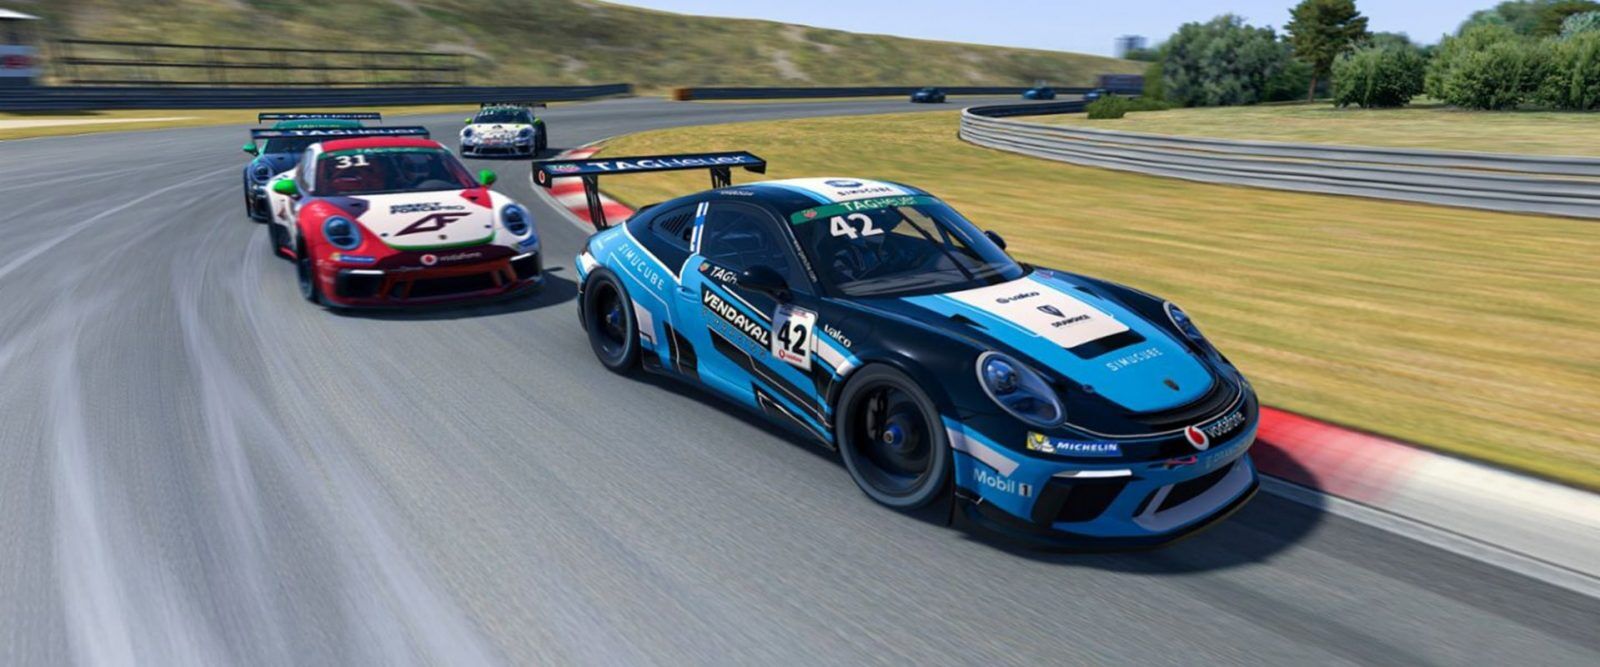 Don't miss these 6 esports racing events in 2021